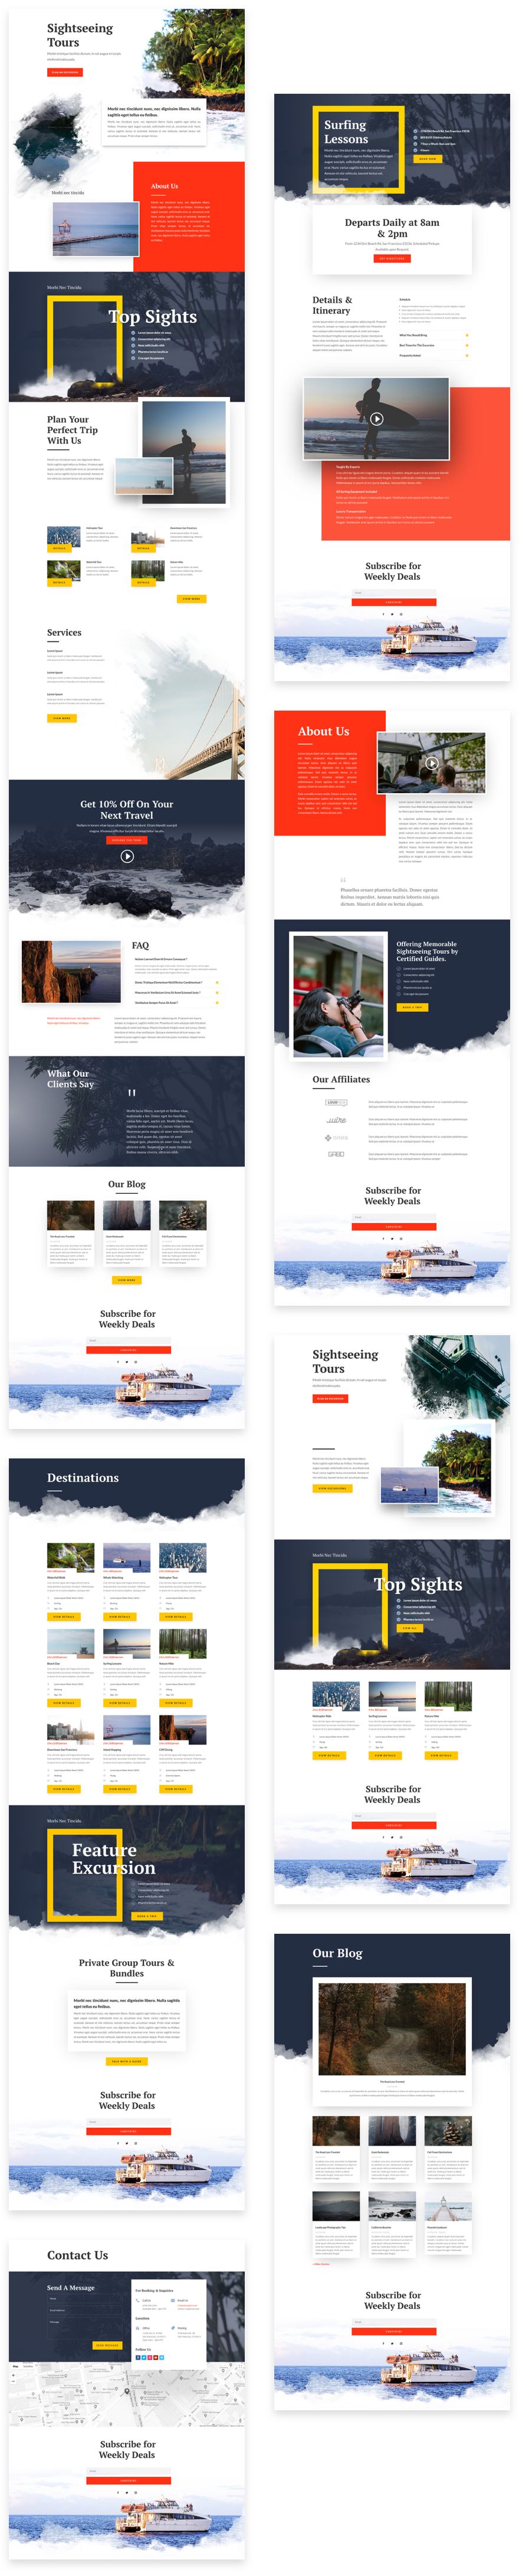 Sightseeing Divi Layout Pack